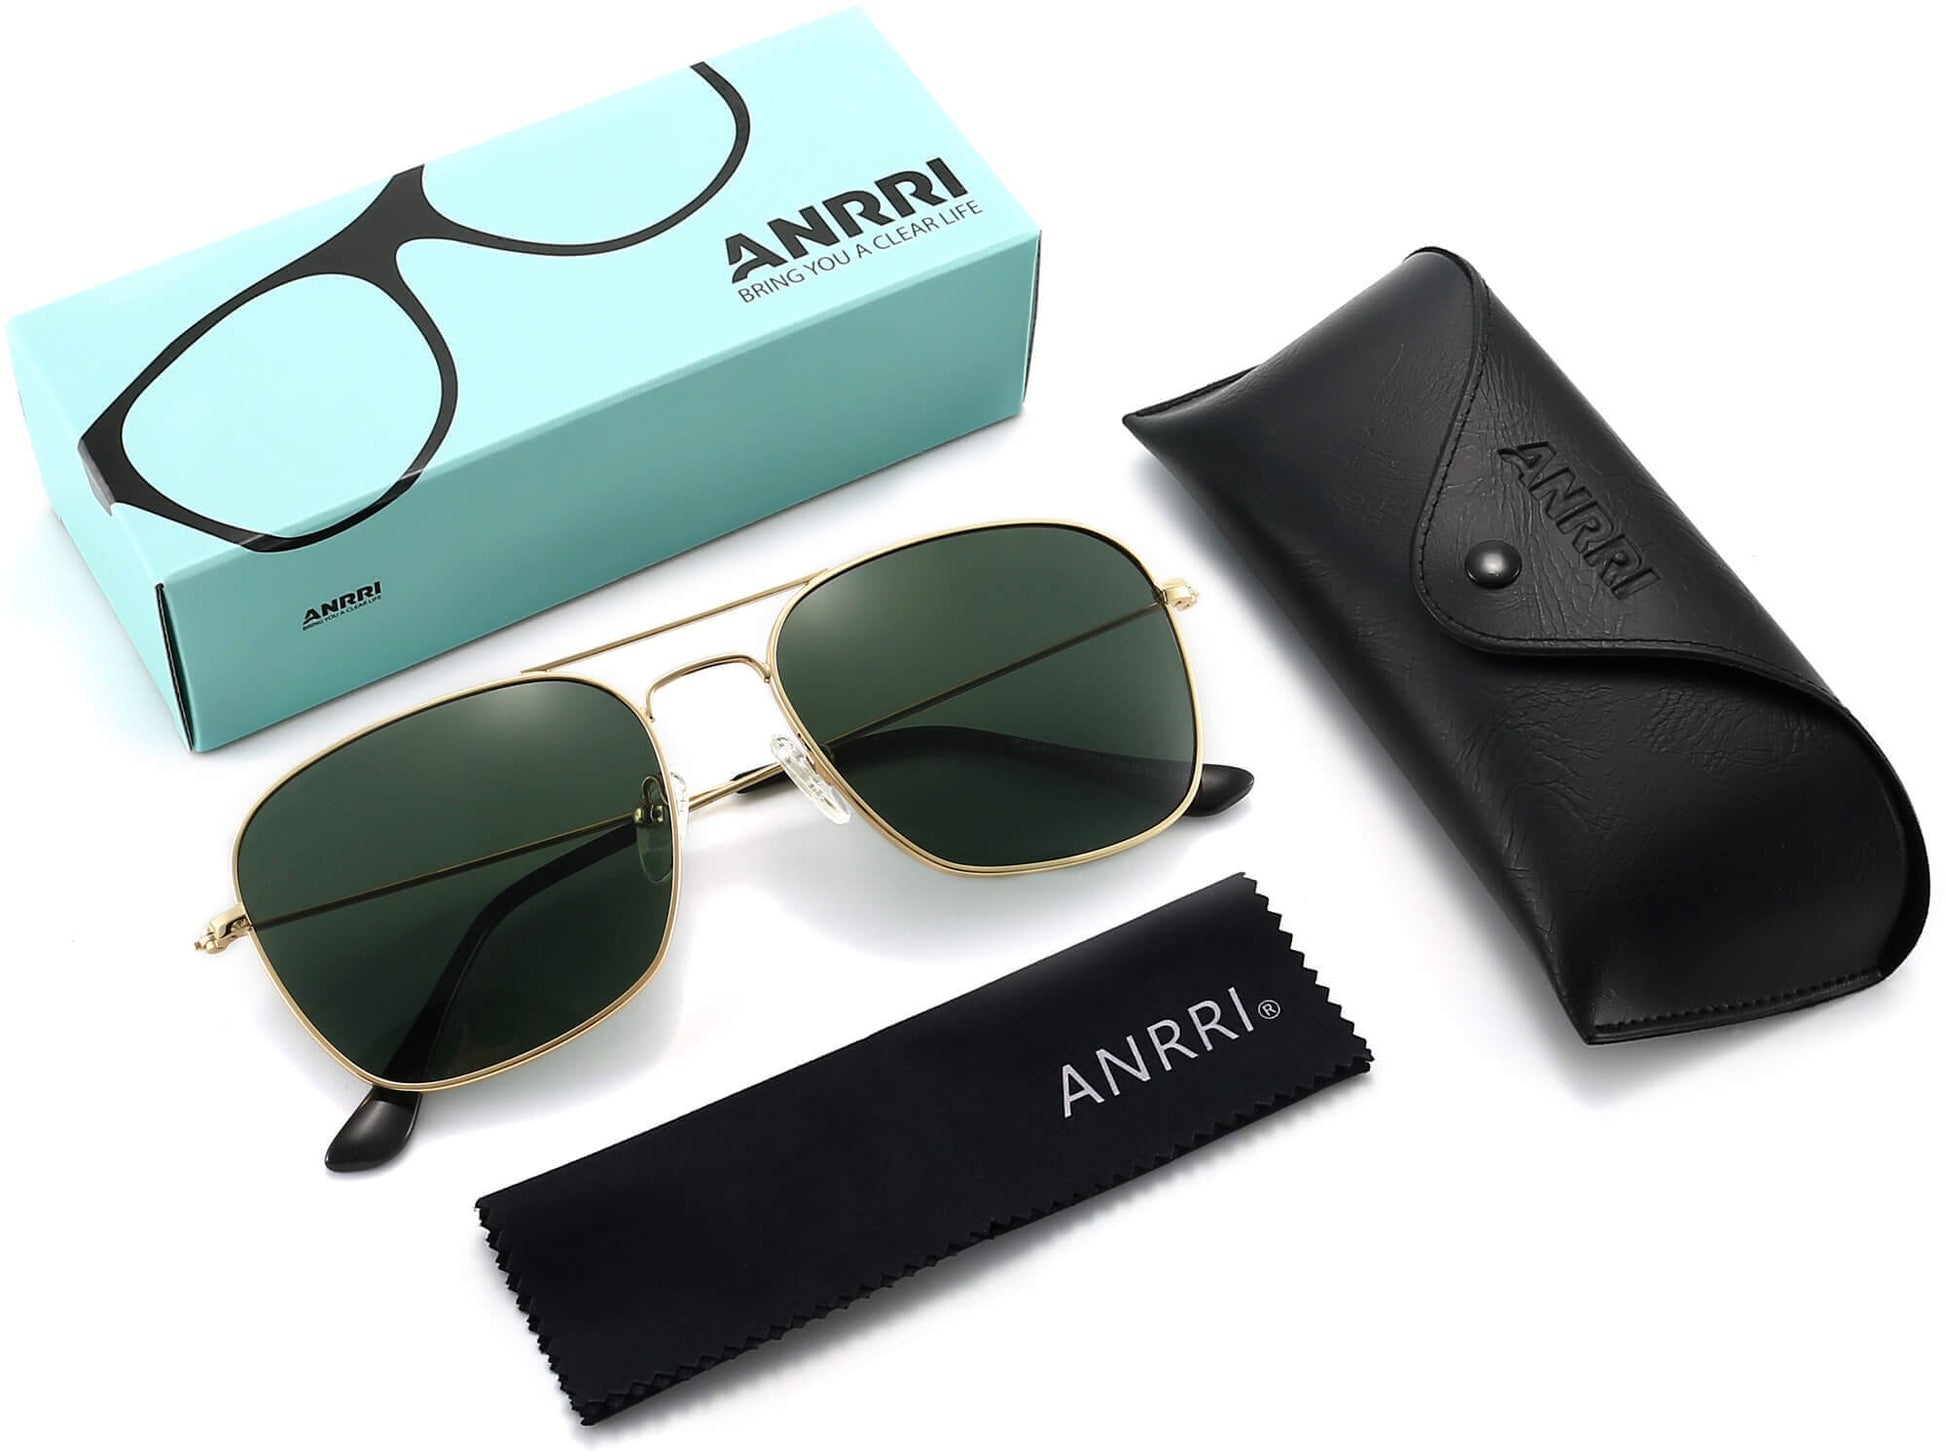 Sam Gold Stainless steel Sunglasses with Accessories from ANRRI